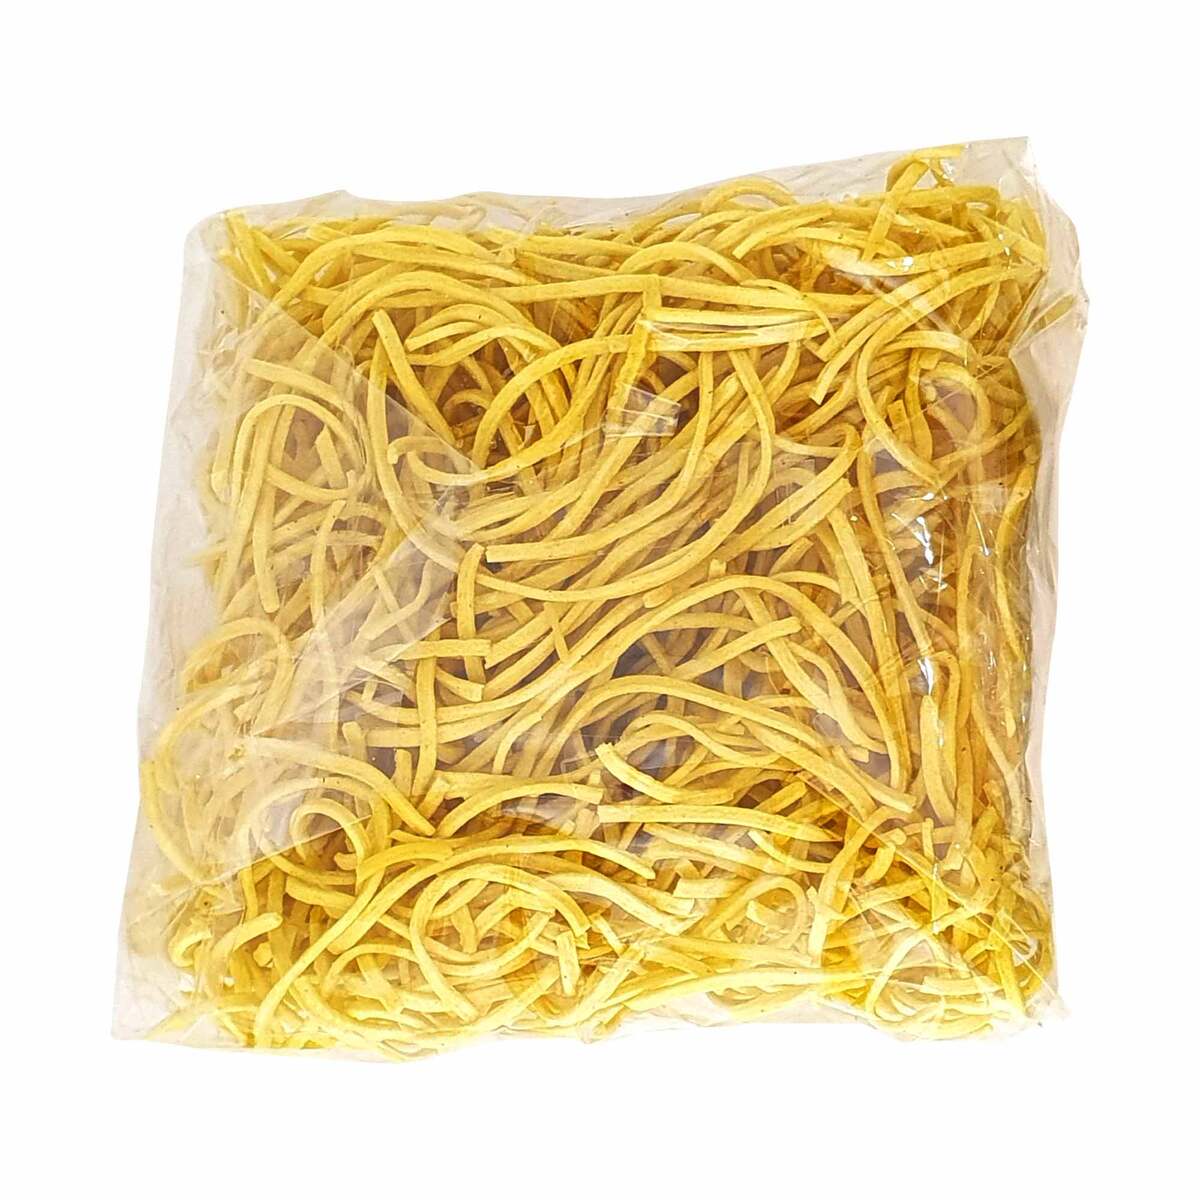 Siblings Chinese Noodle 227 g